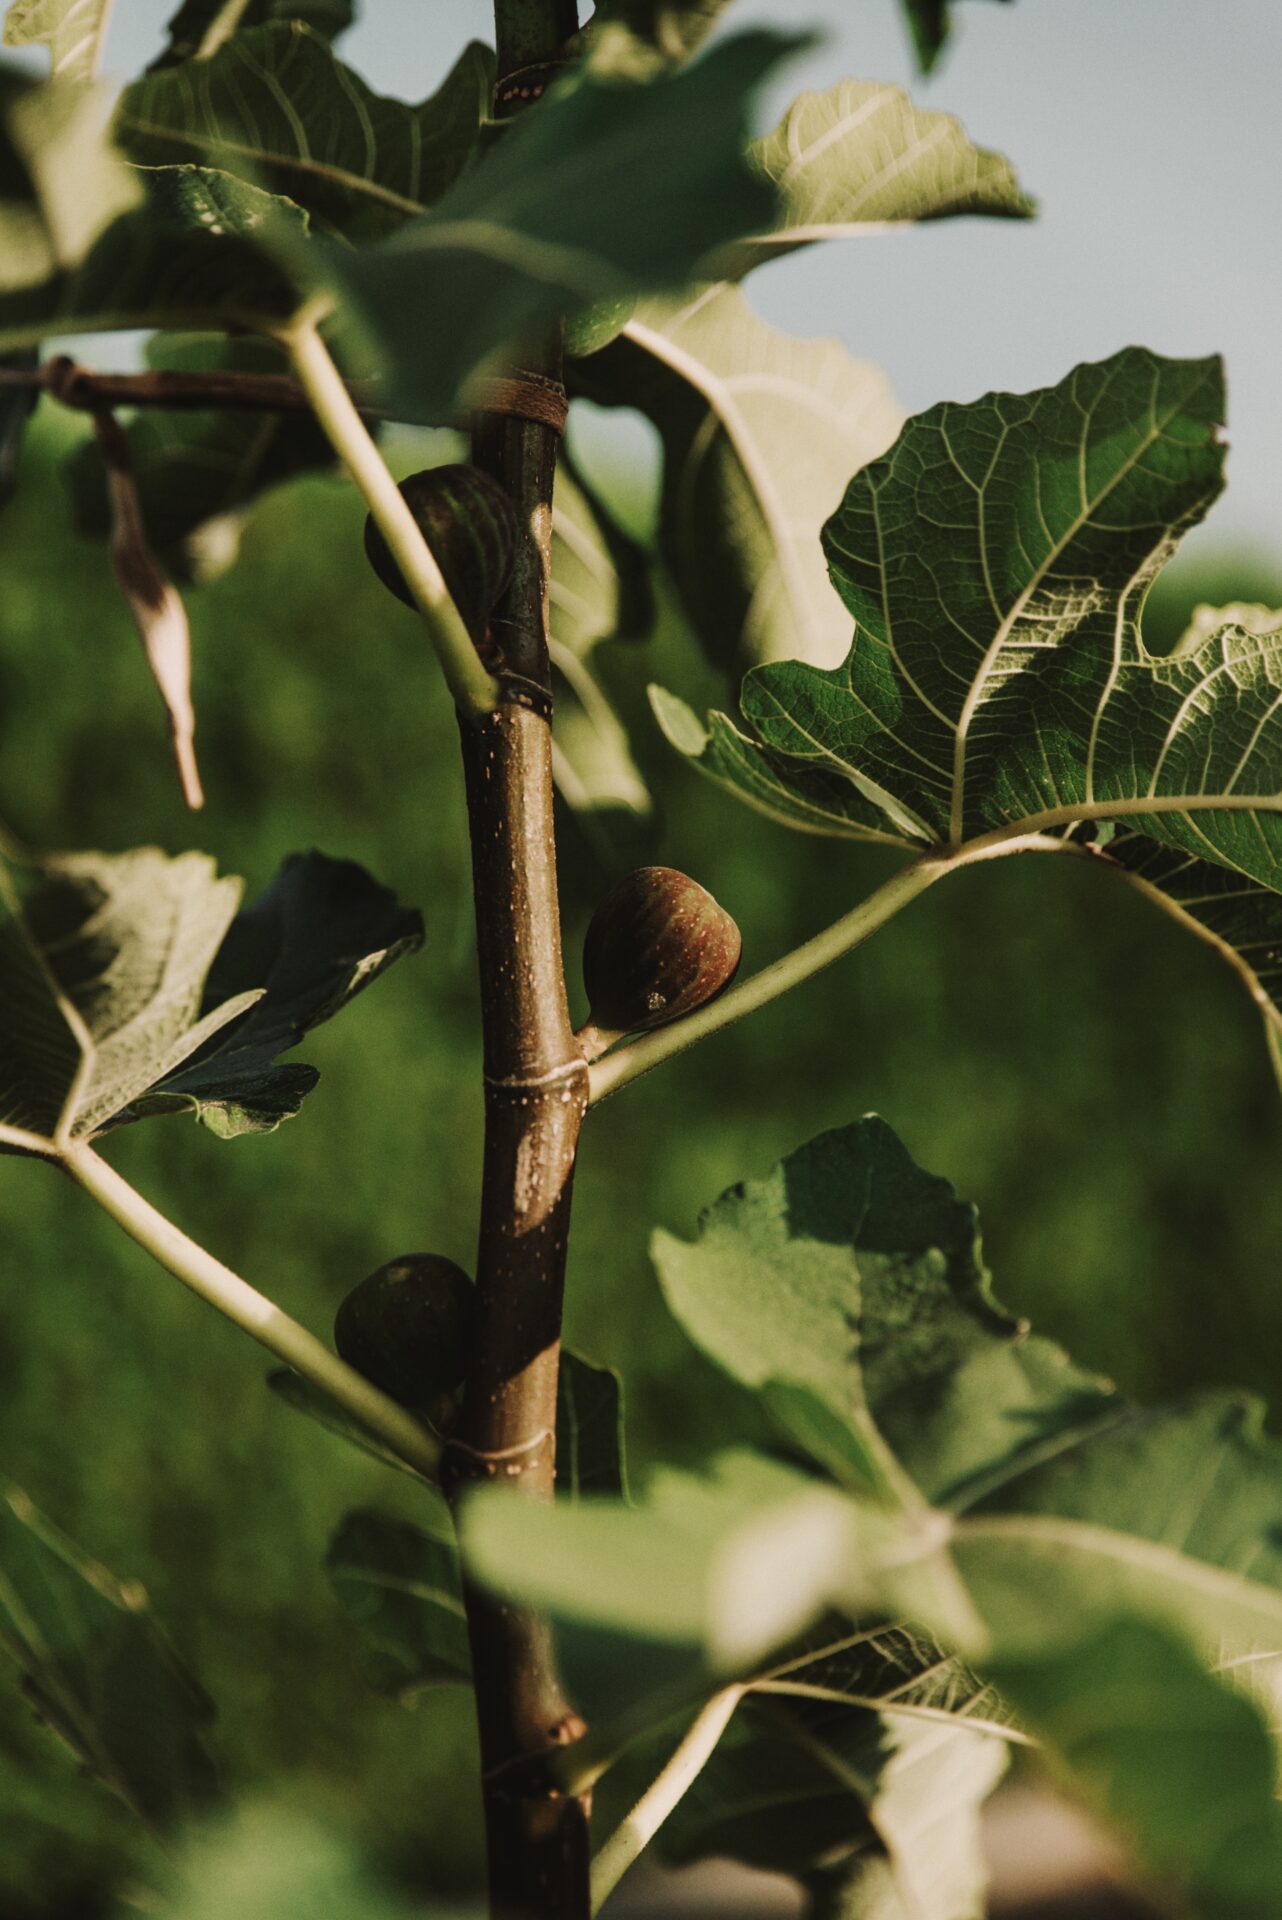 figs growing on a young fig tree